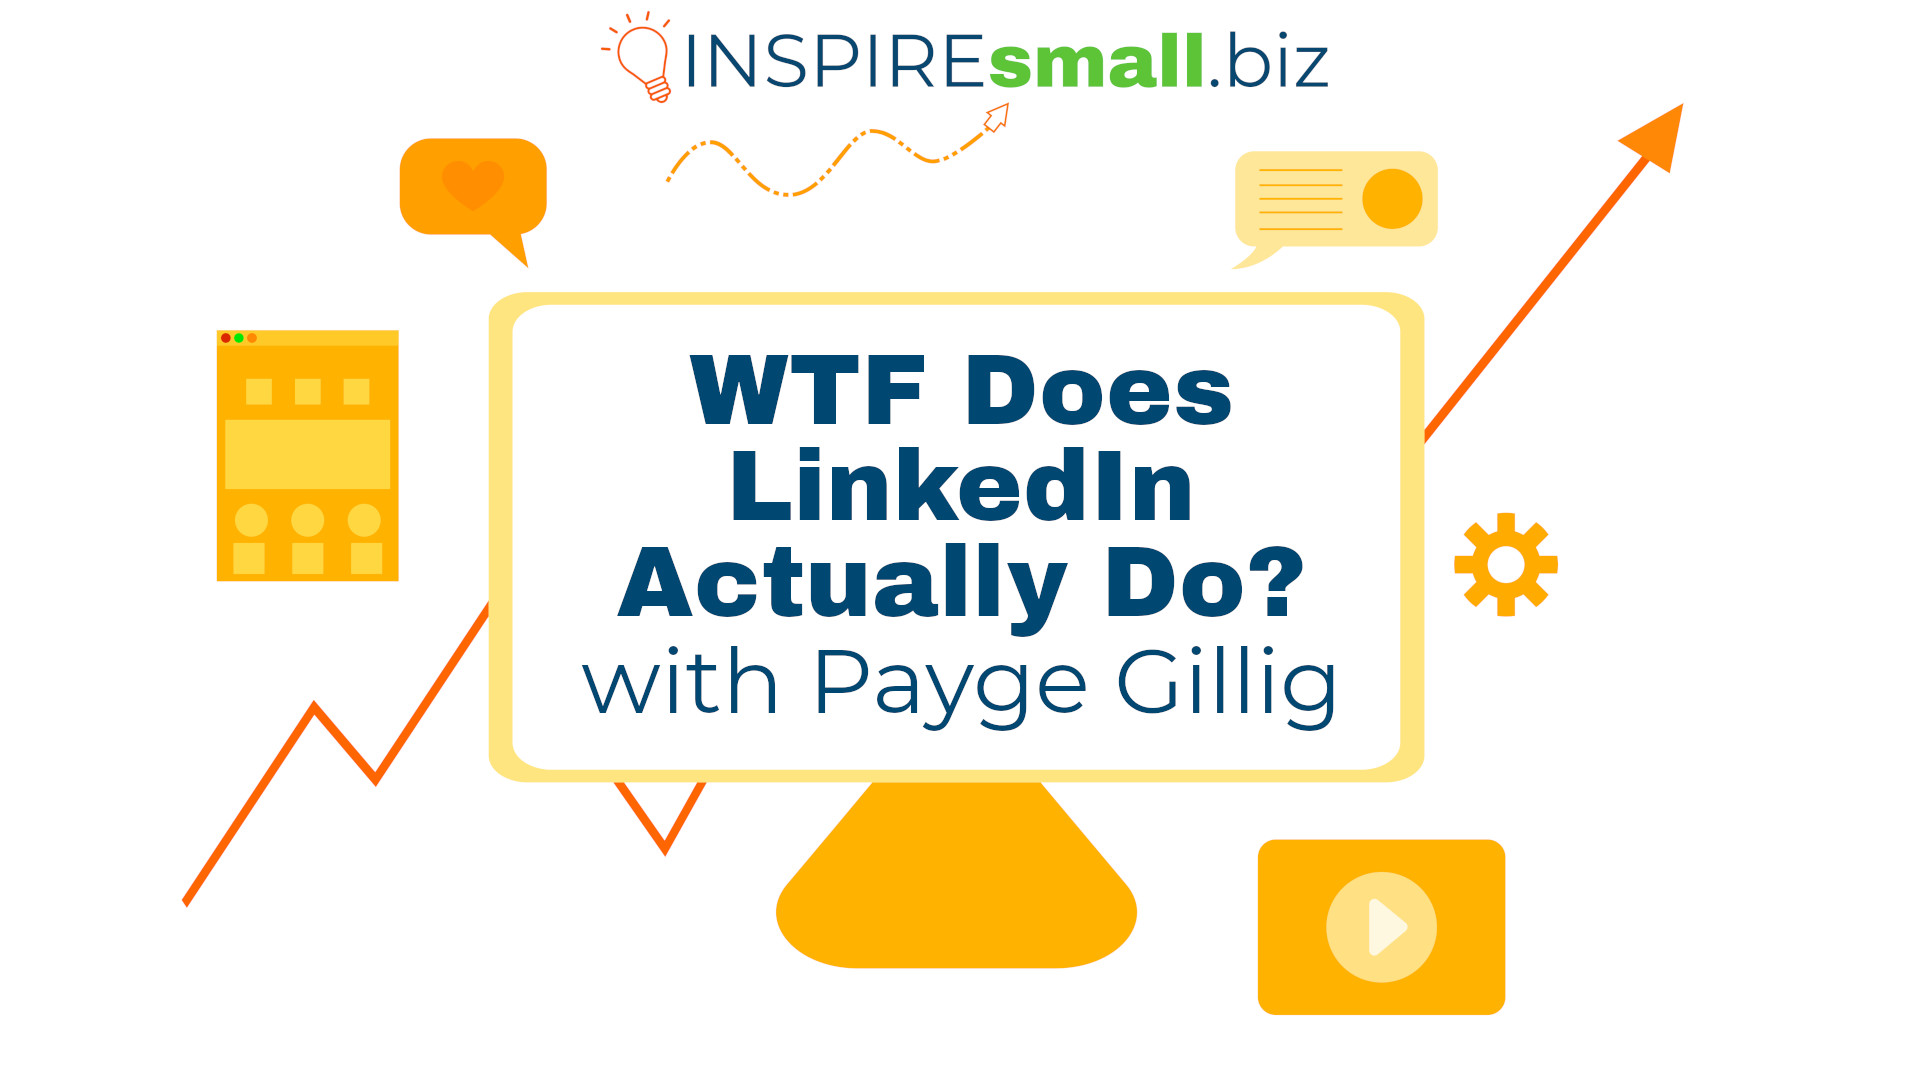 Do you ever wonder what LinkedIn actually does or why it matters for your business? You're not alone. Join us as Payge Gillig from the Jack Laurie Group shares how you can start using LinkedIn to get the word out about your business.